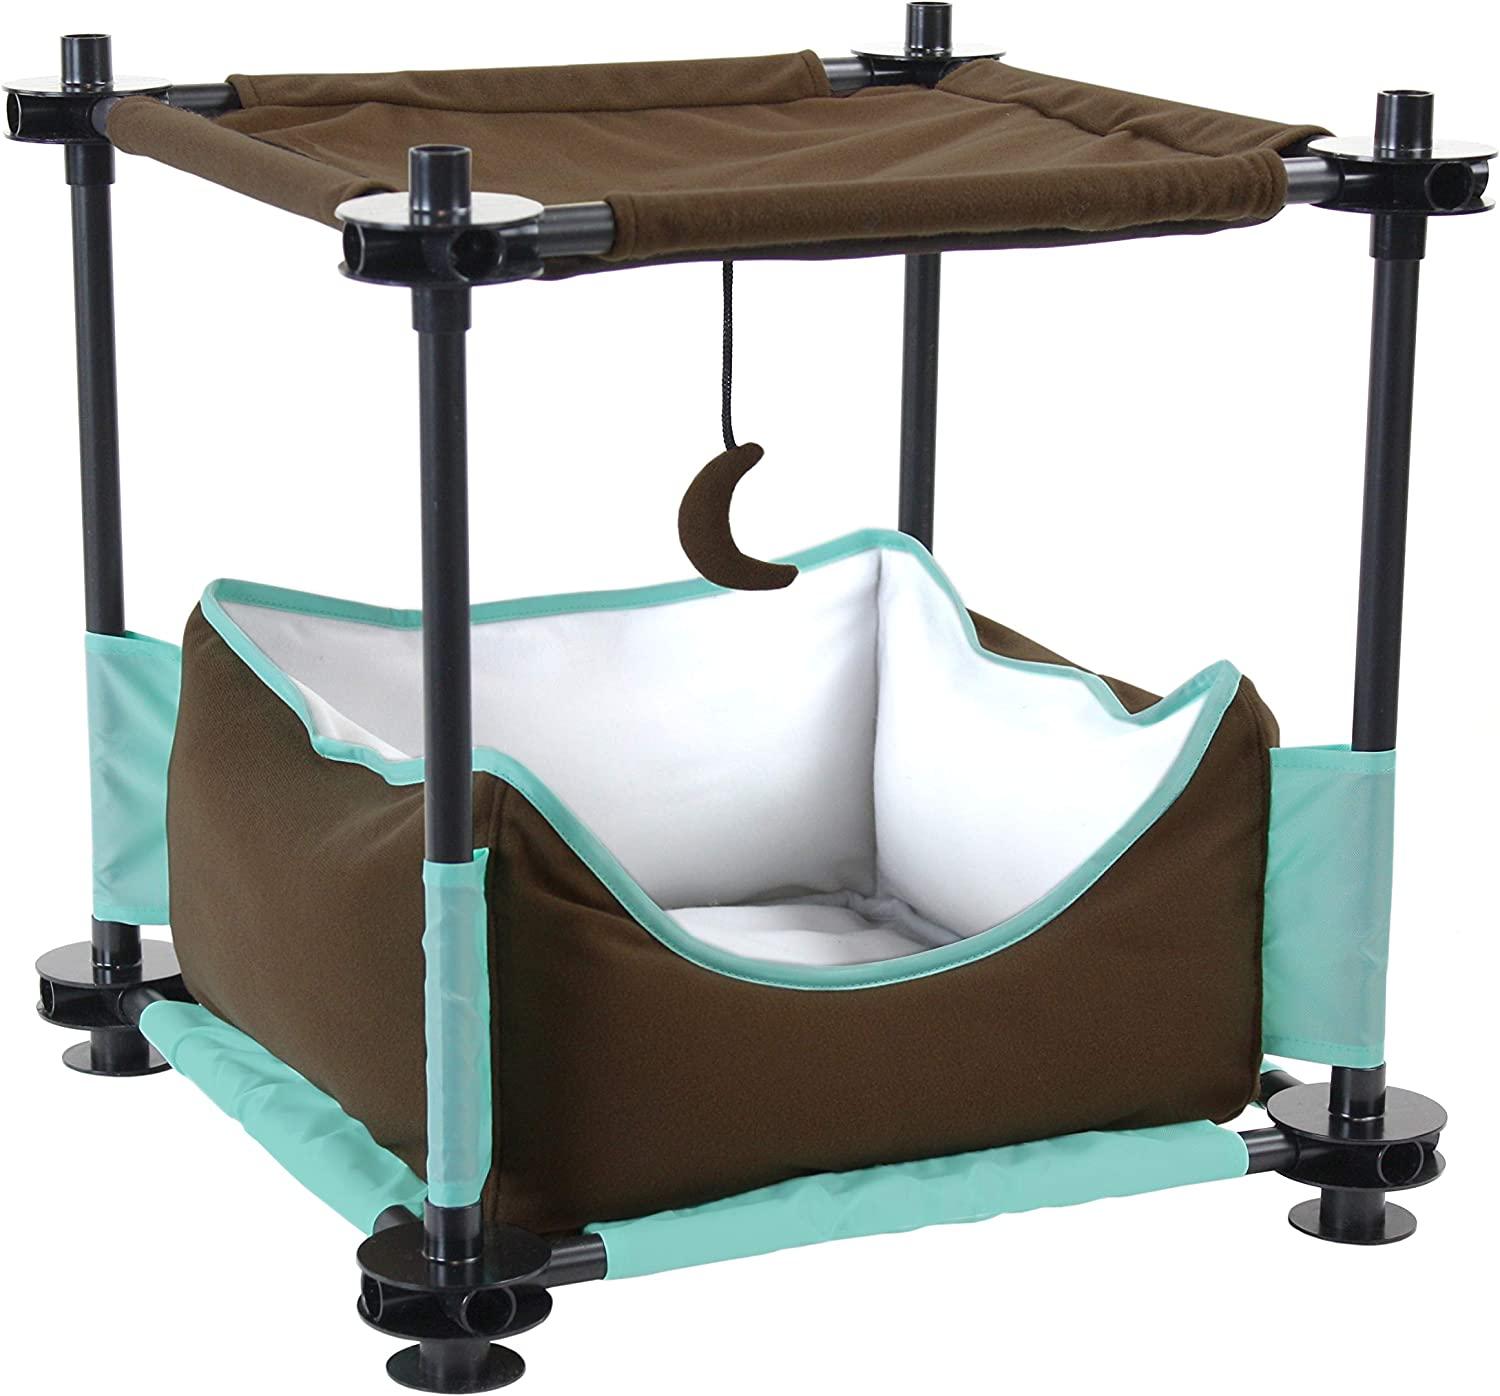 Kitty City Claw Indoor and Outdoor Mega Kit Cat Sleeper Furniture for $16.99